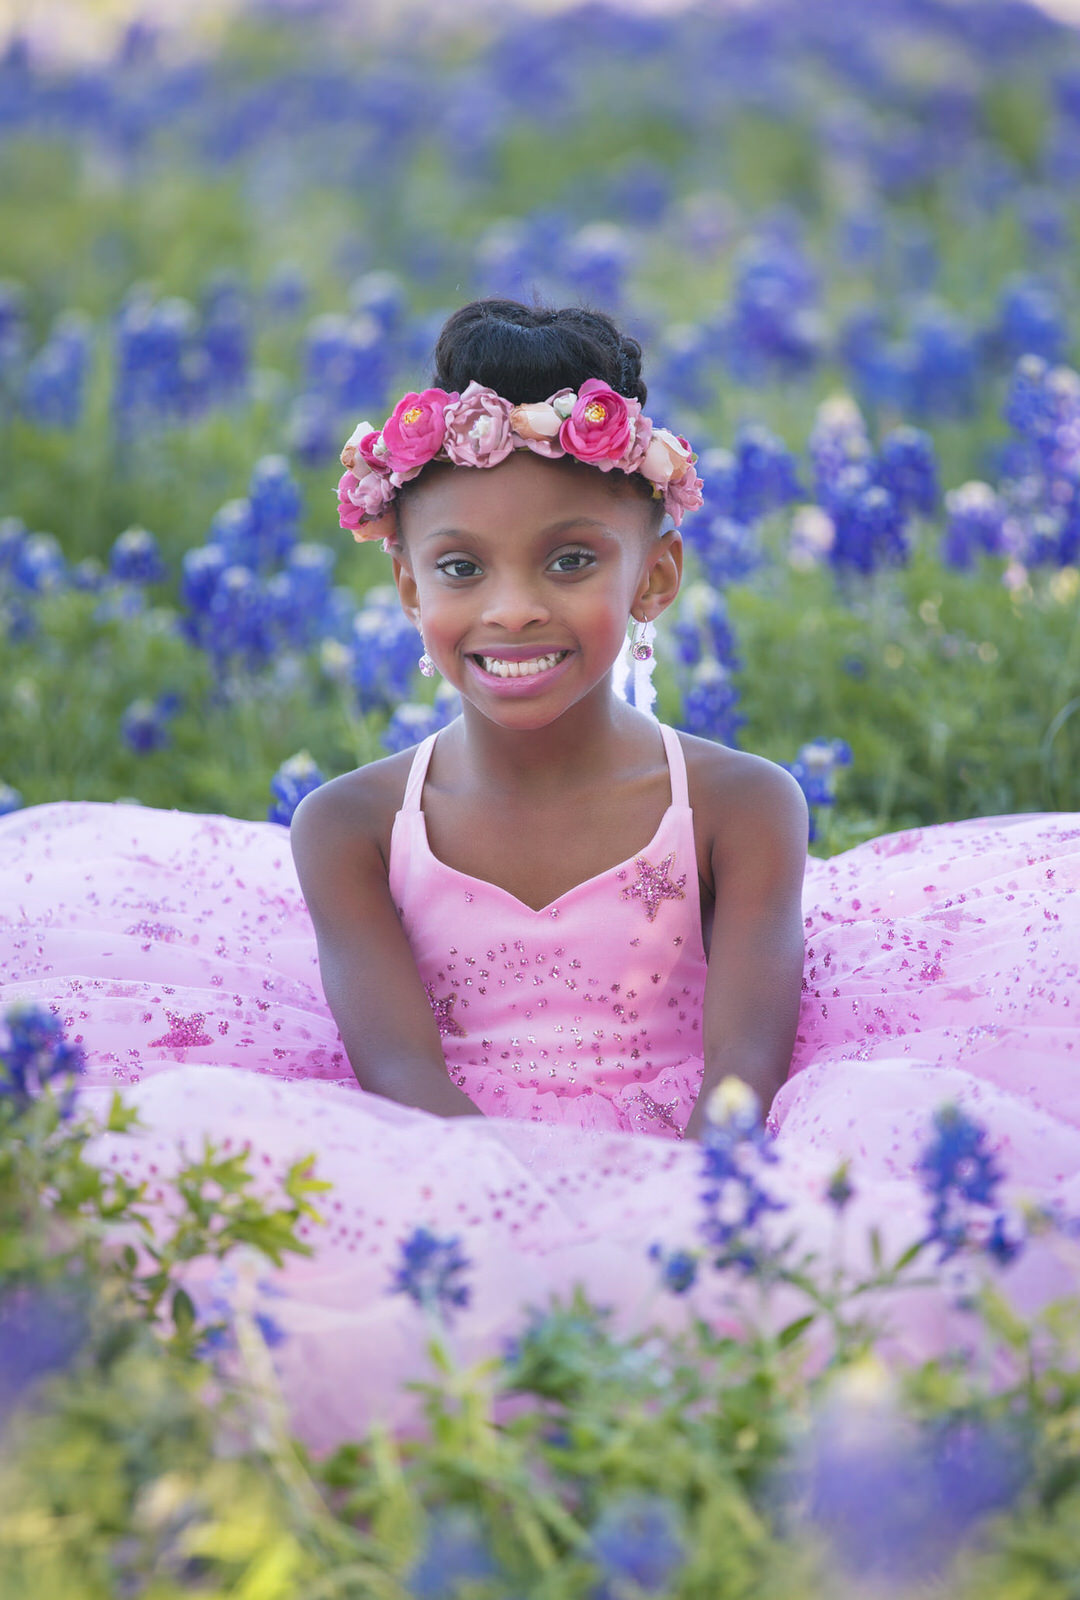 young girl in pink dress posing in field of bluebonnets